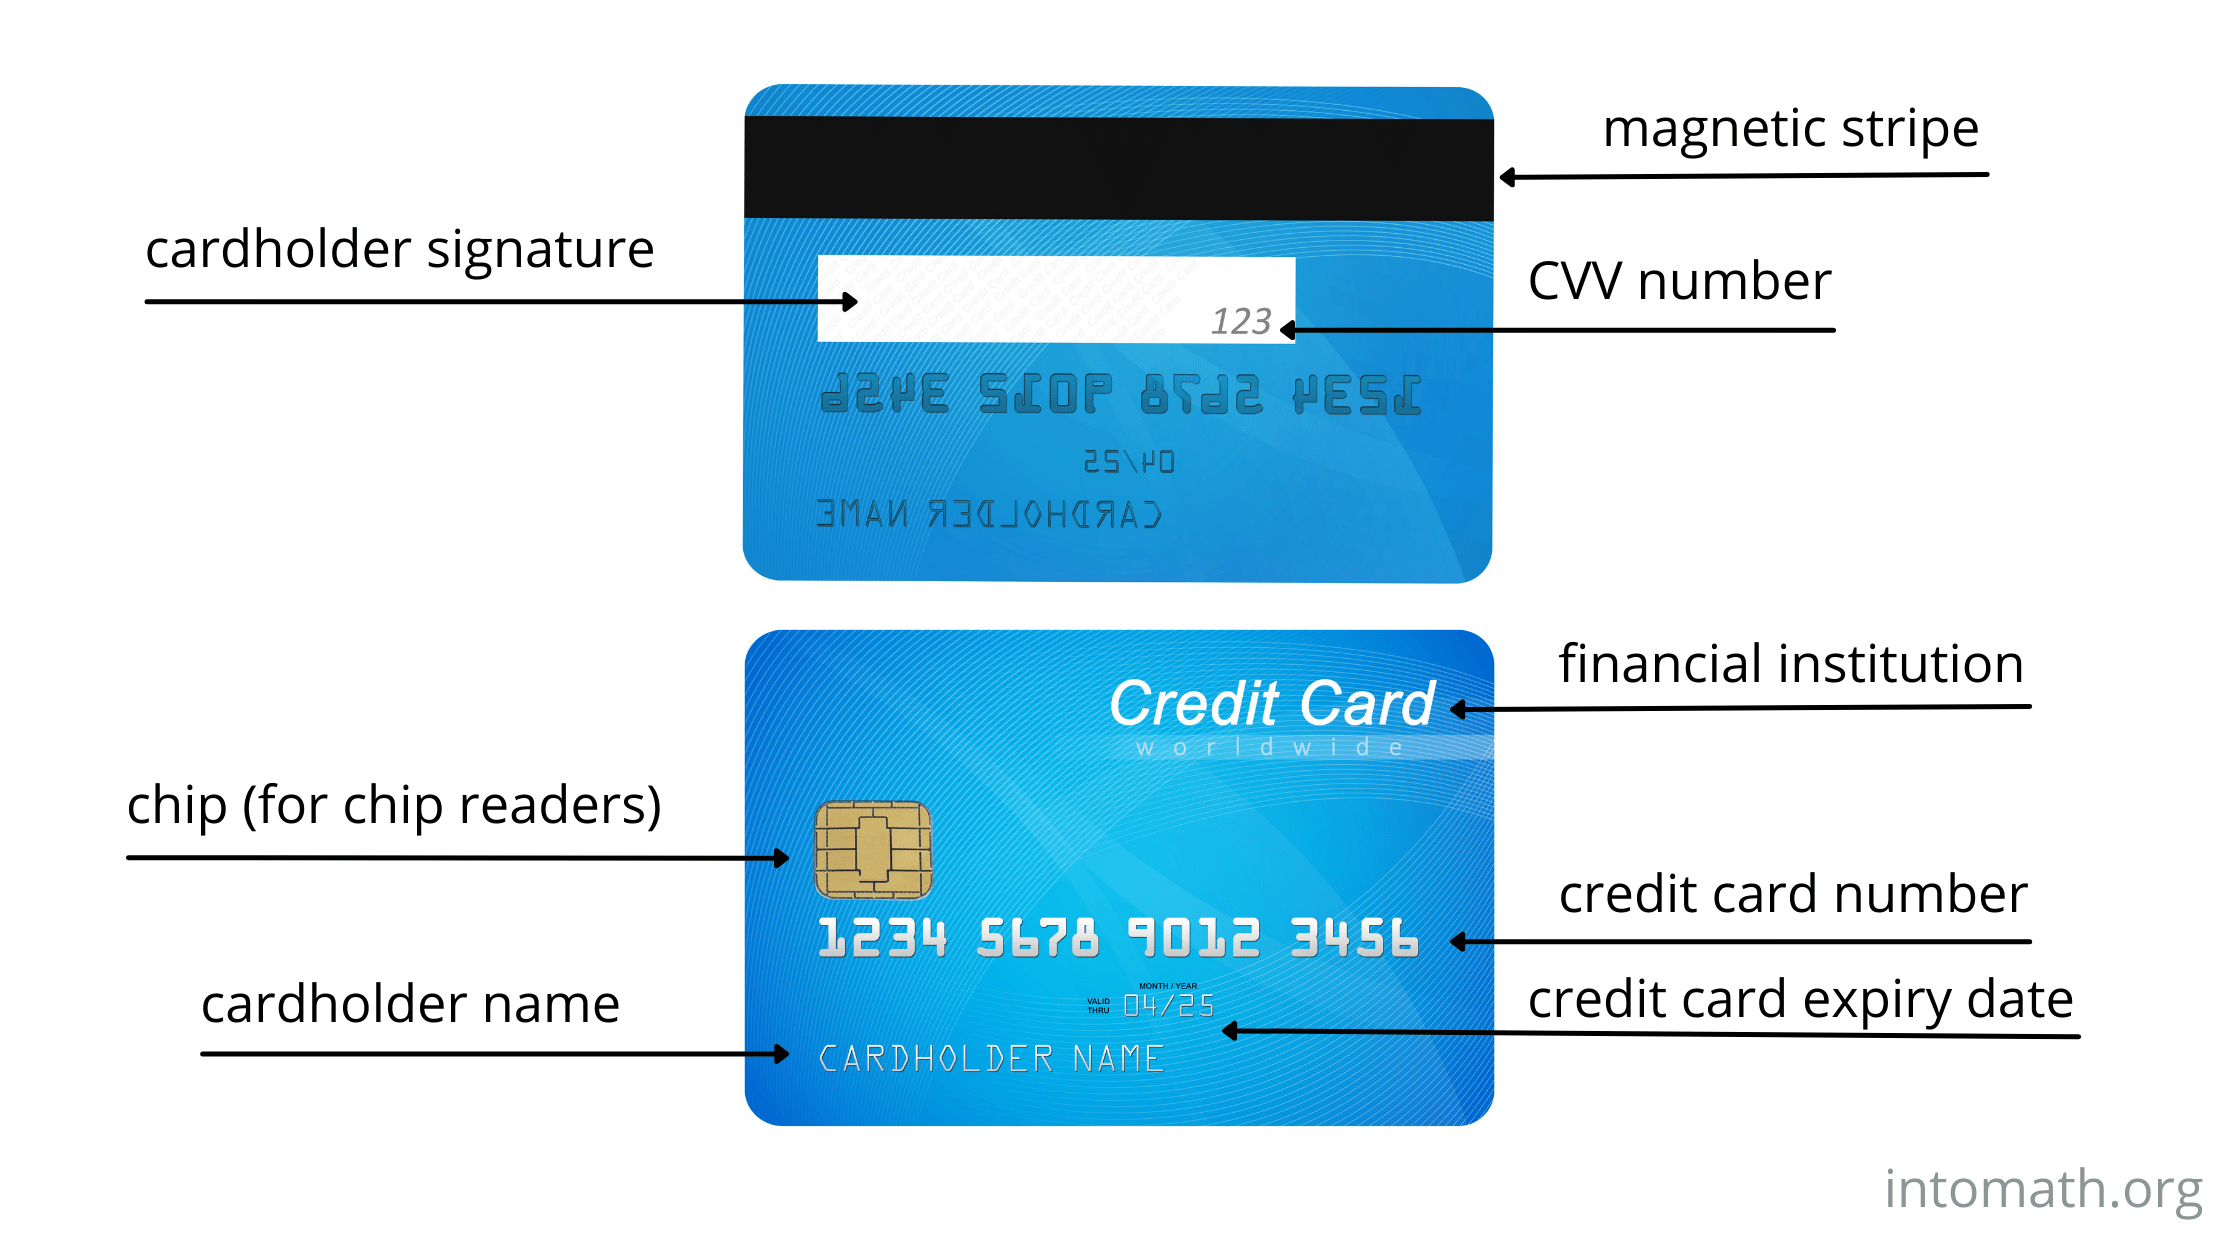 How to get a credit card - IntoMath